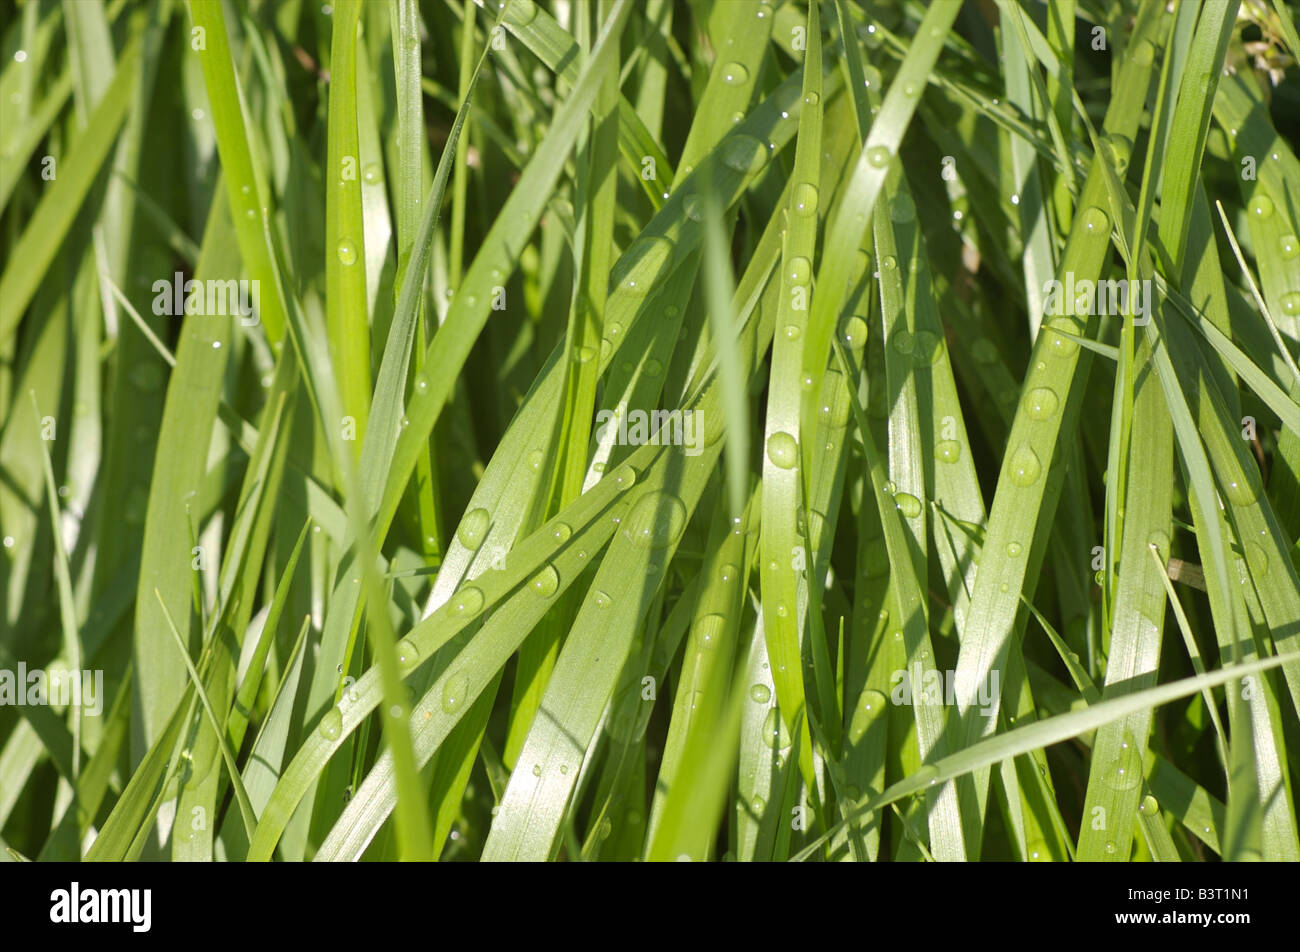 Sweetgrass Hierochloe oderata covered in water drops Eastern Ontario Canada Stock Photo